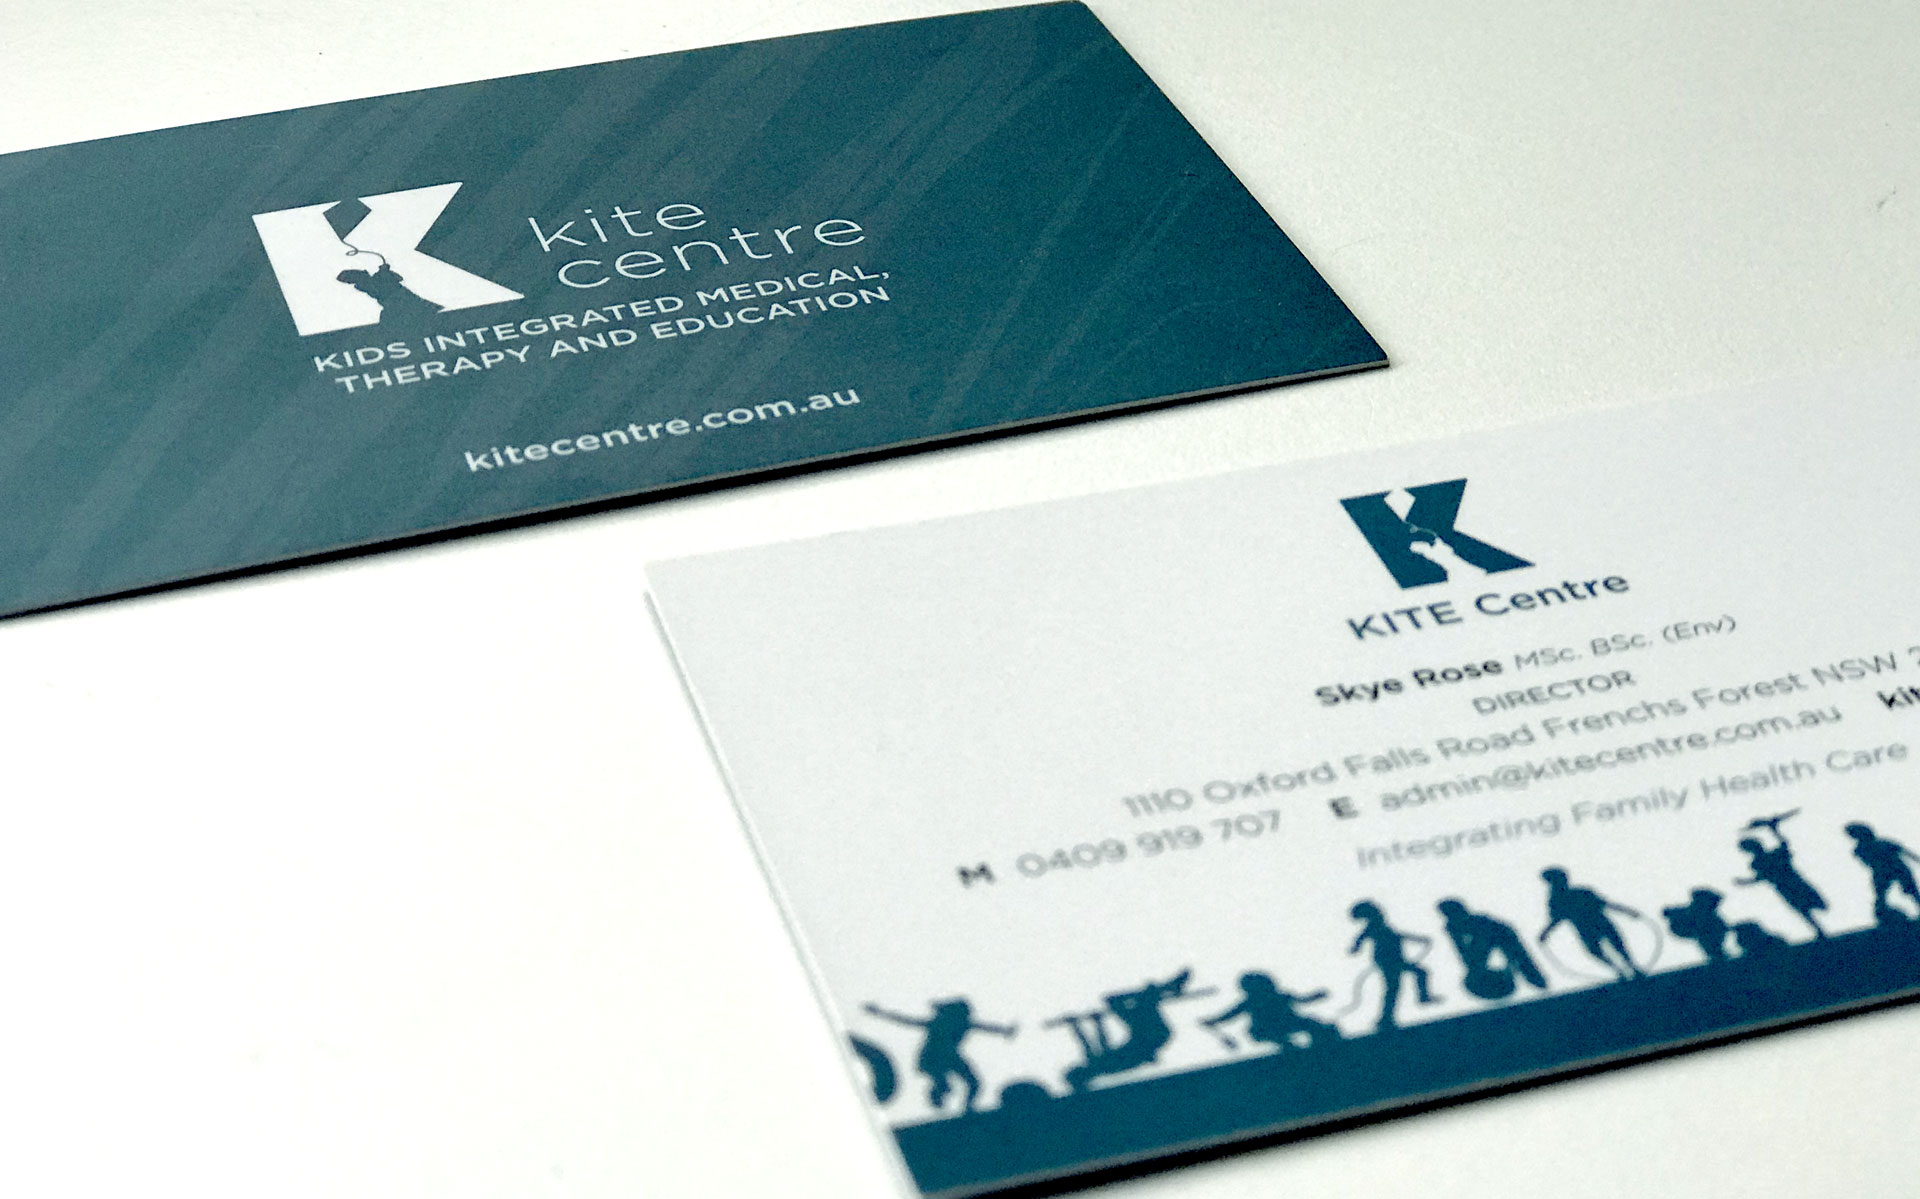 Kite Centre Branding & Marketing designed by Amy at Yellow Sunday